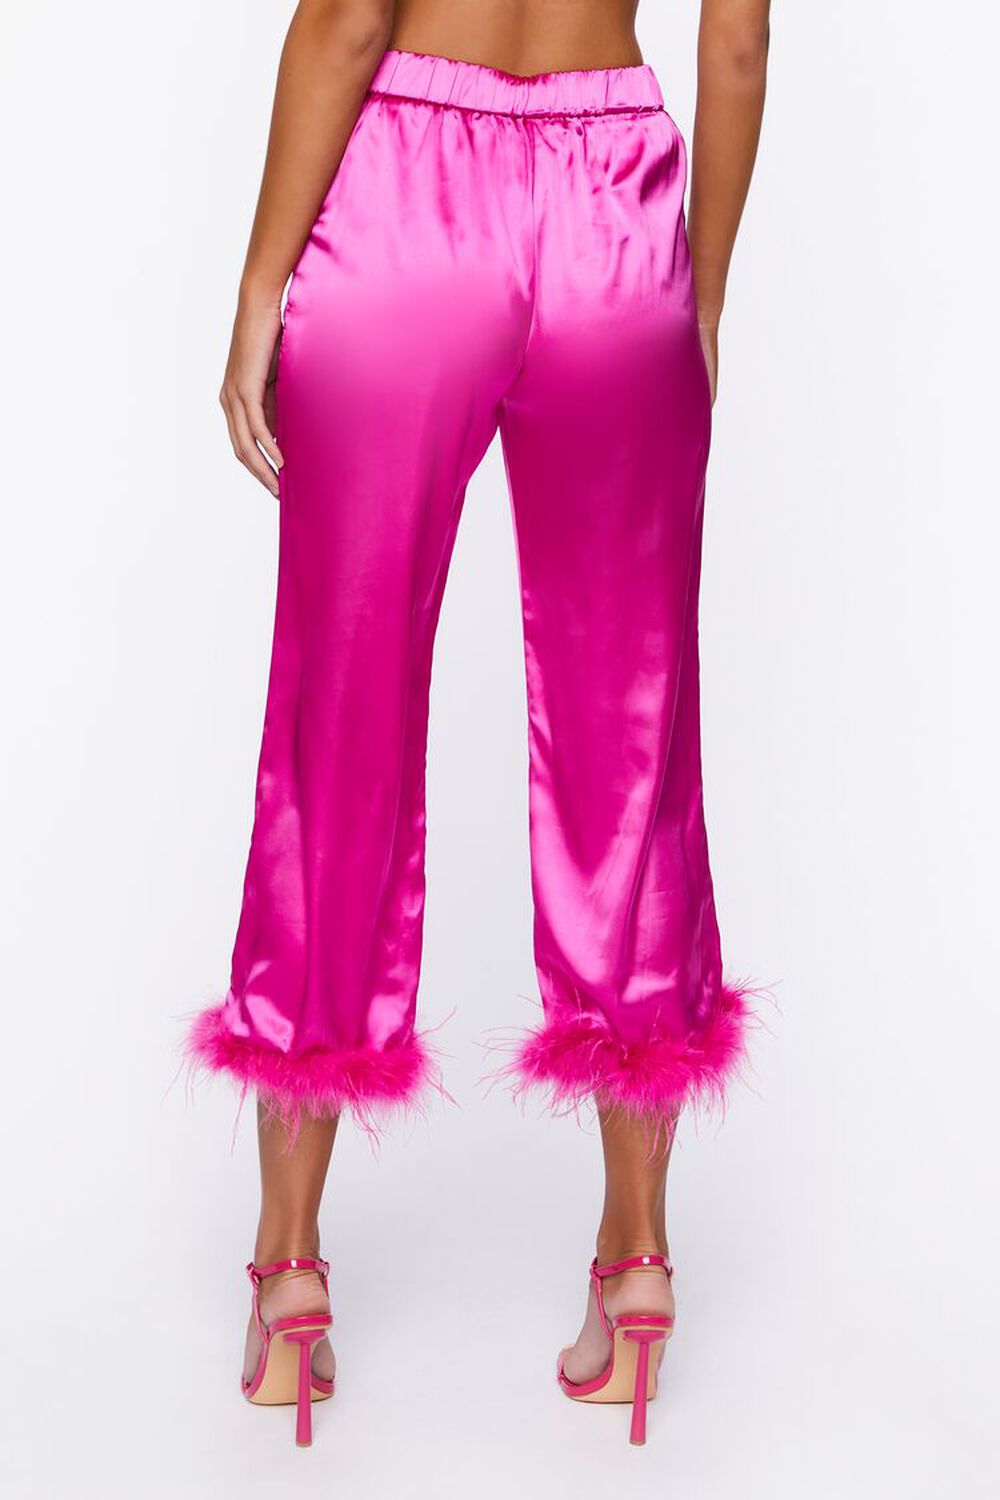 Feather pants  Buy our pink pants from our offical e-shop – Sleeper